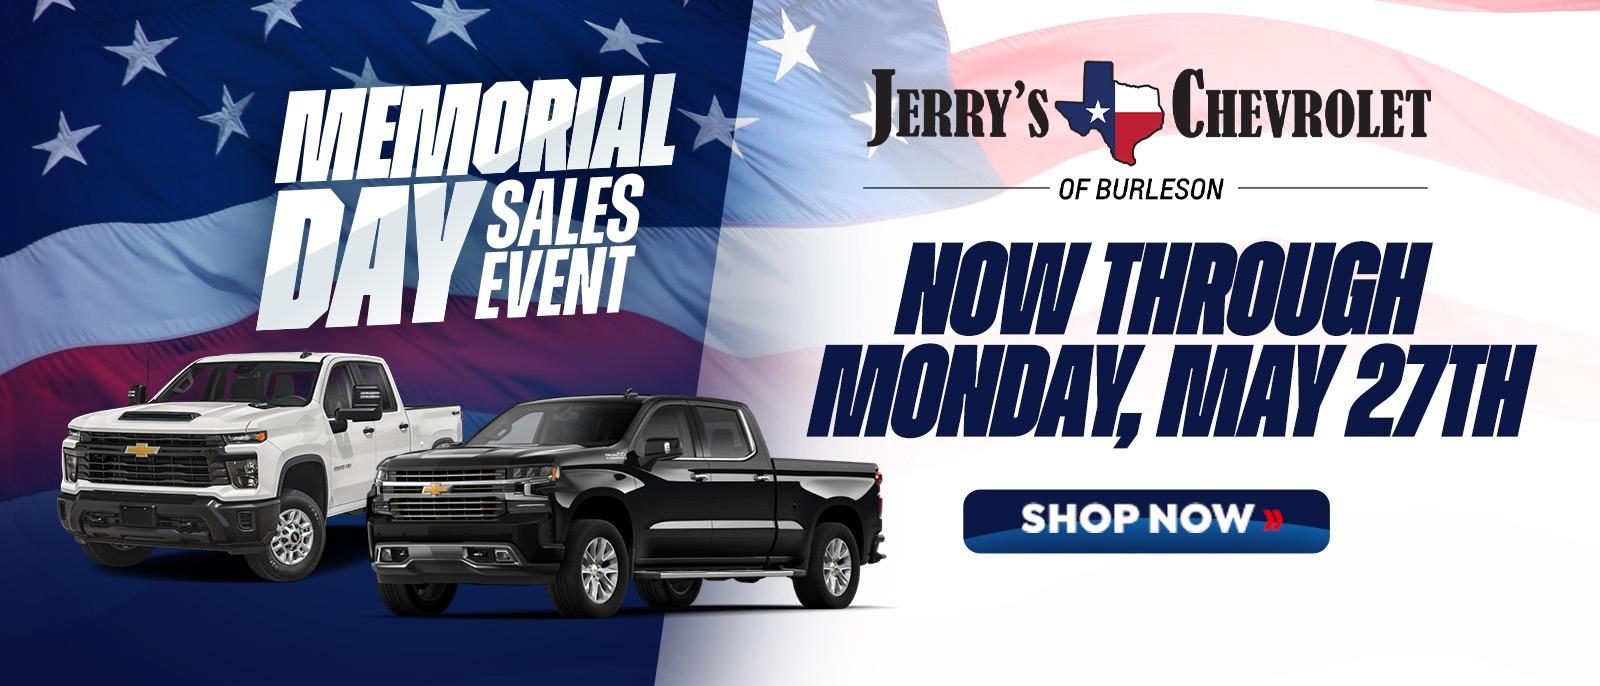 Chevy of Burleson Memorial Day Sales Event